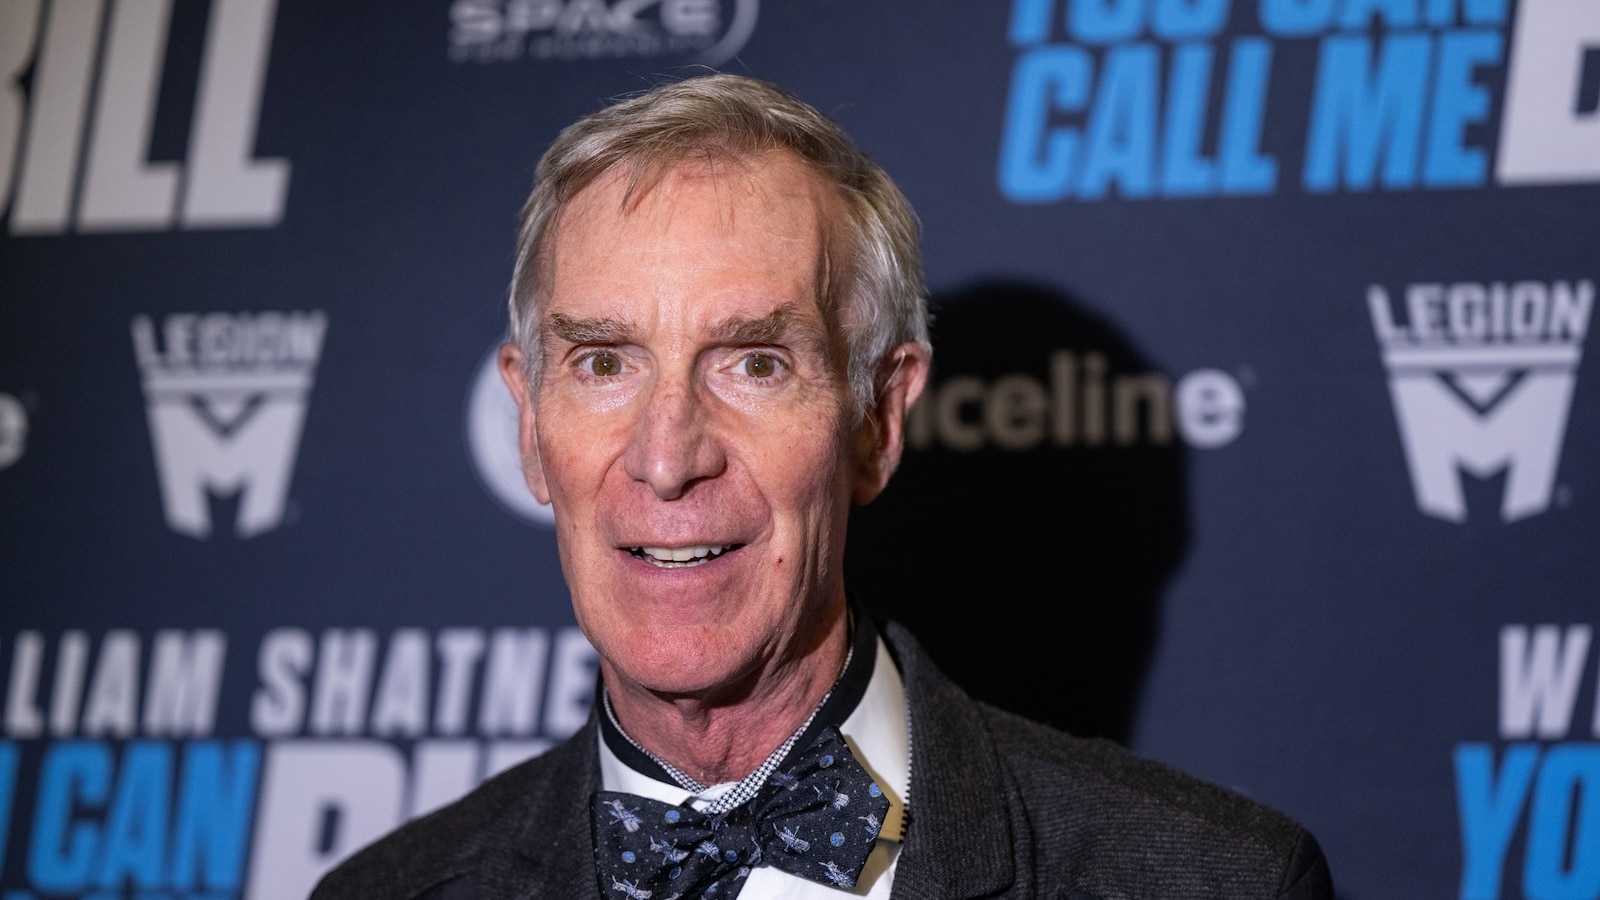 Bill Nye predicts that record-breaking extreme heat is a sign of future climate norms.